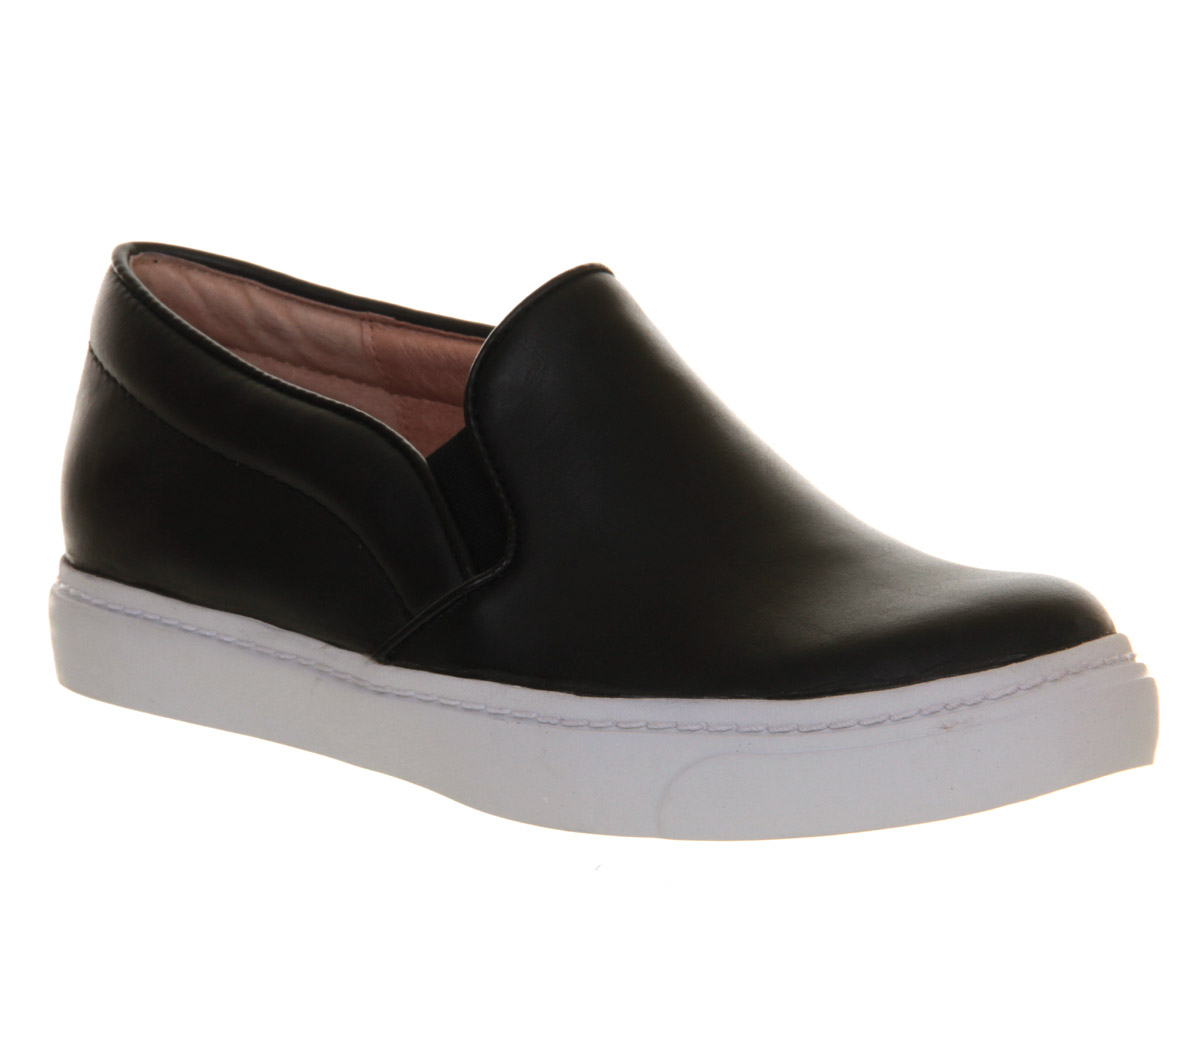 black leather shoes with white sole